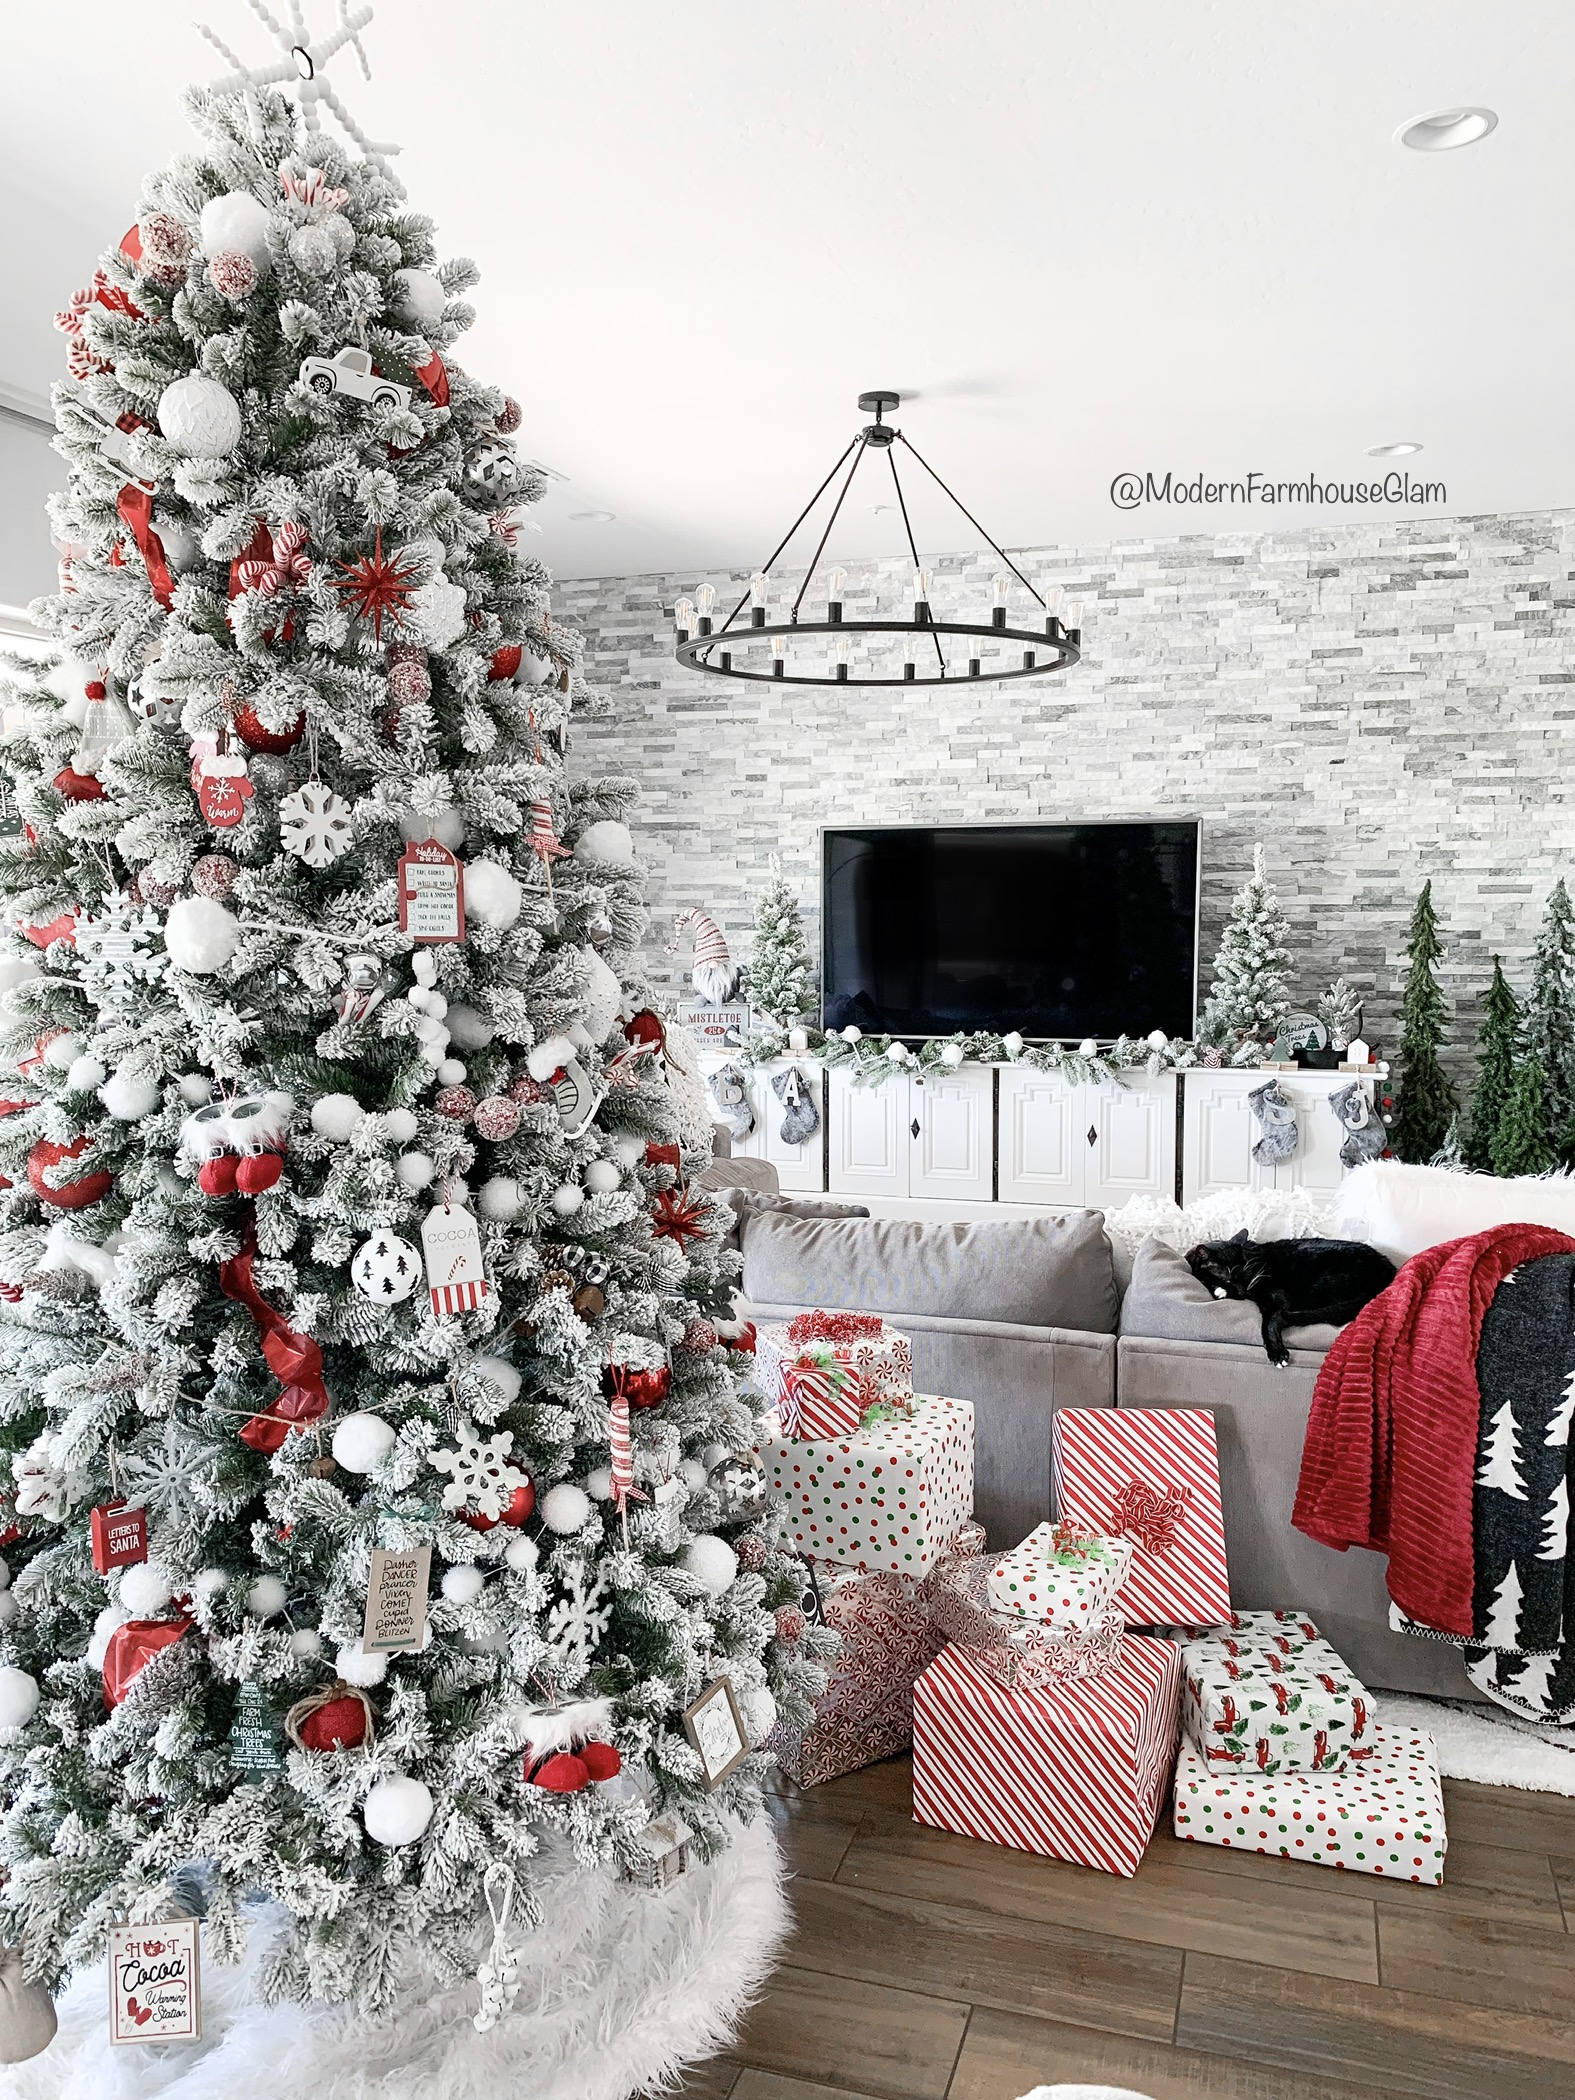 Flocked white Christmas tree with all white and silver decorations